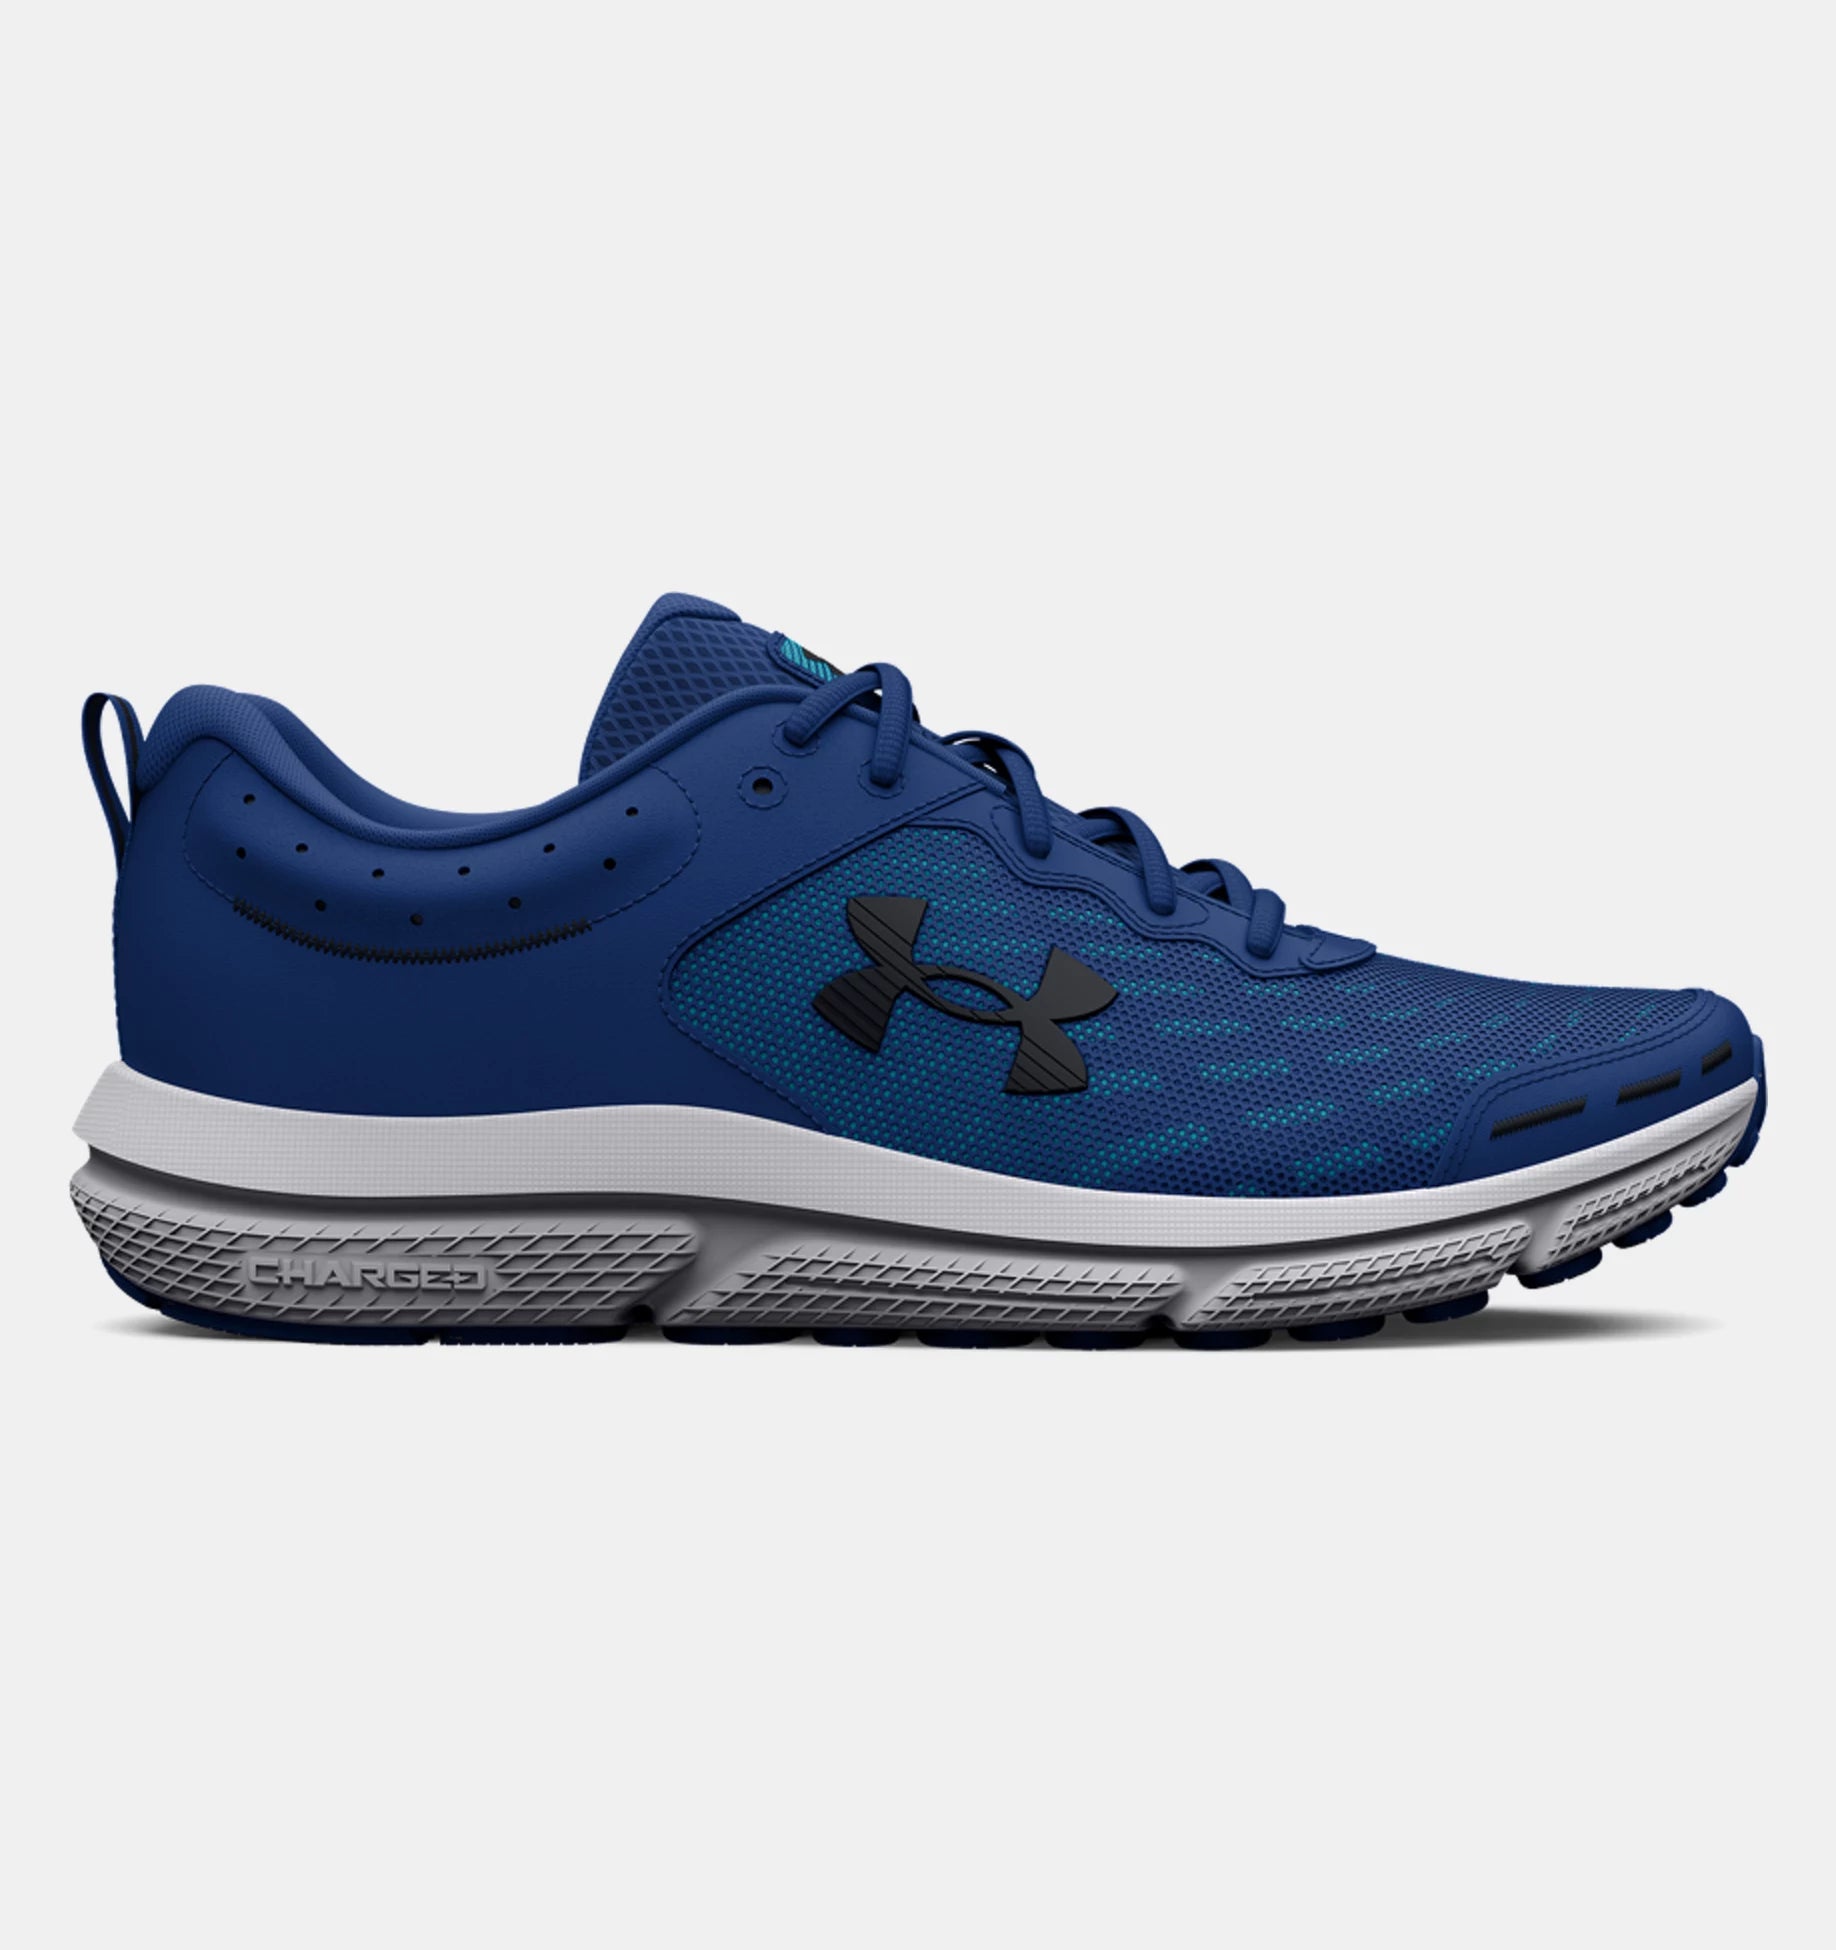 Under Armour Charged Assert 10 - Mens